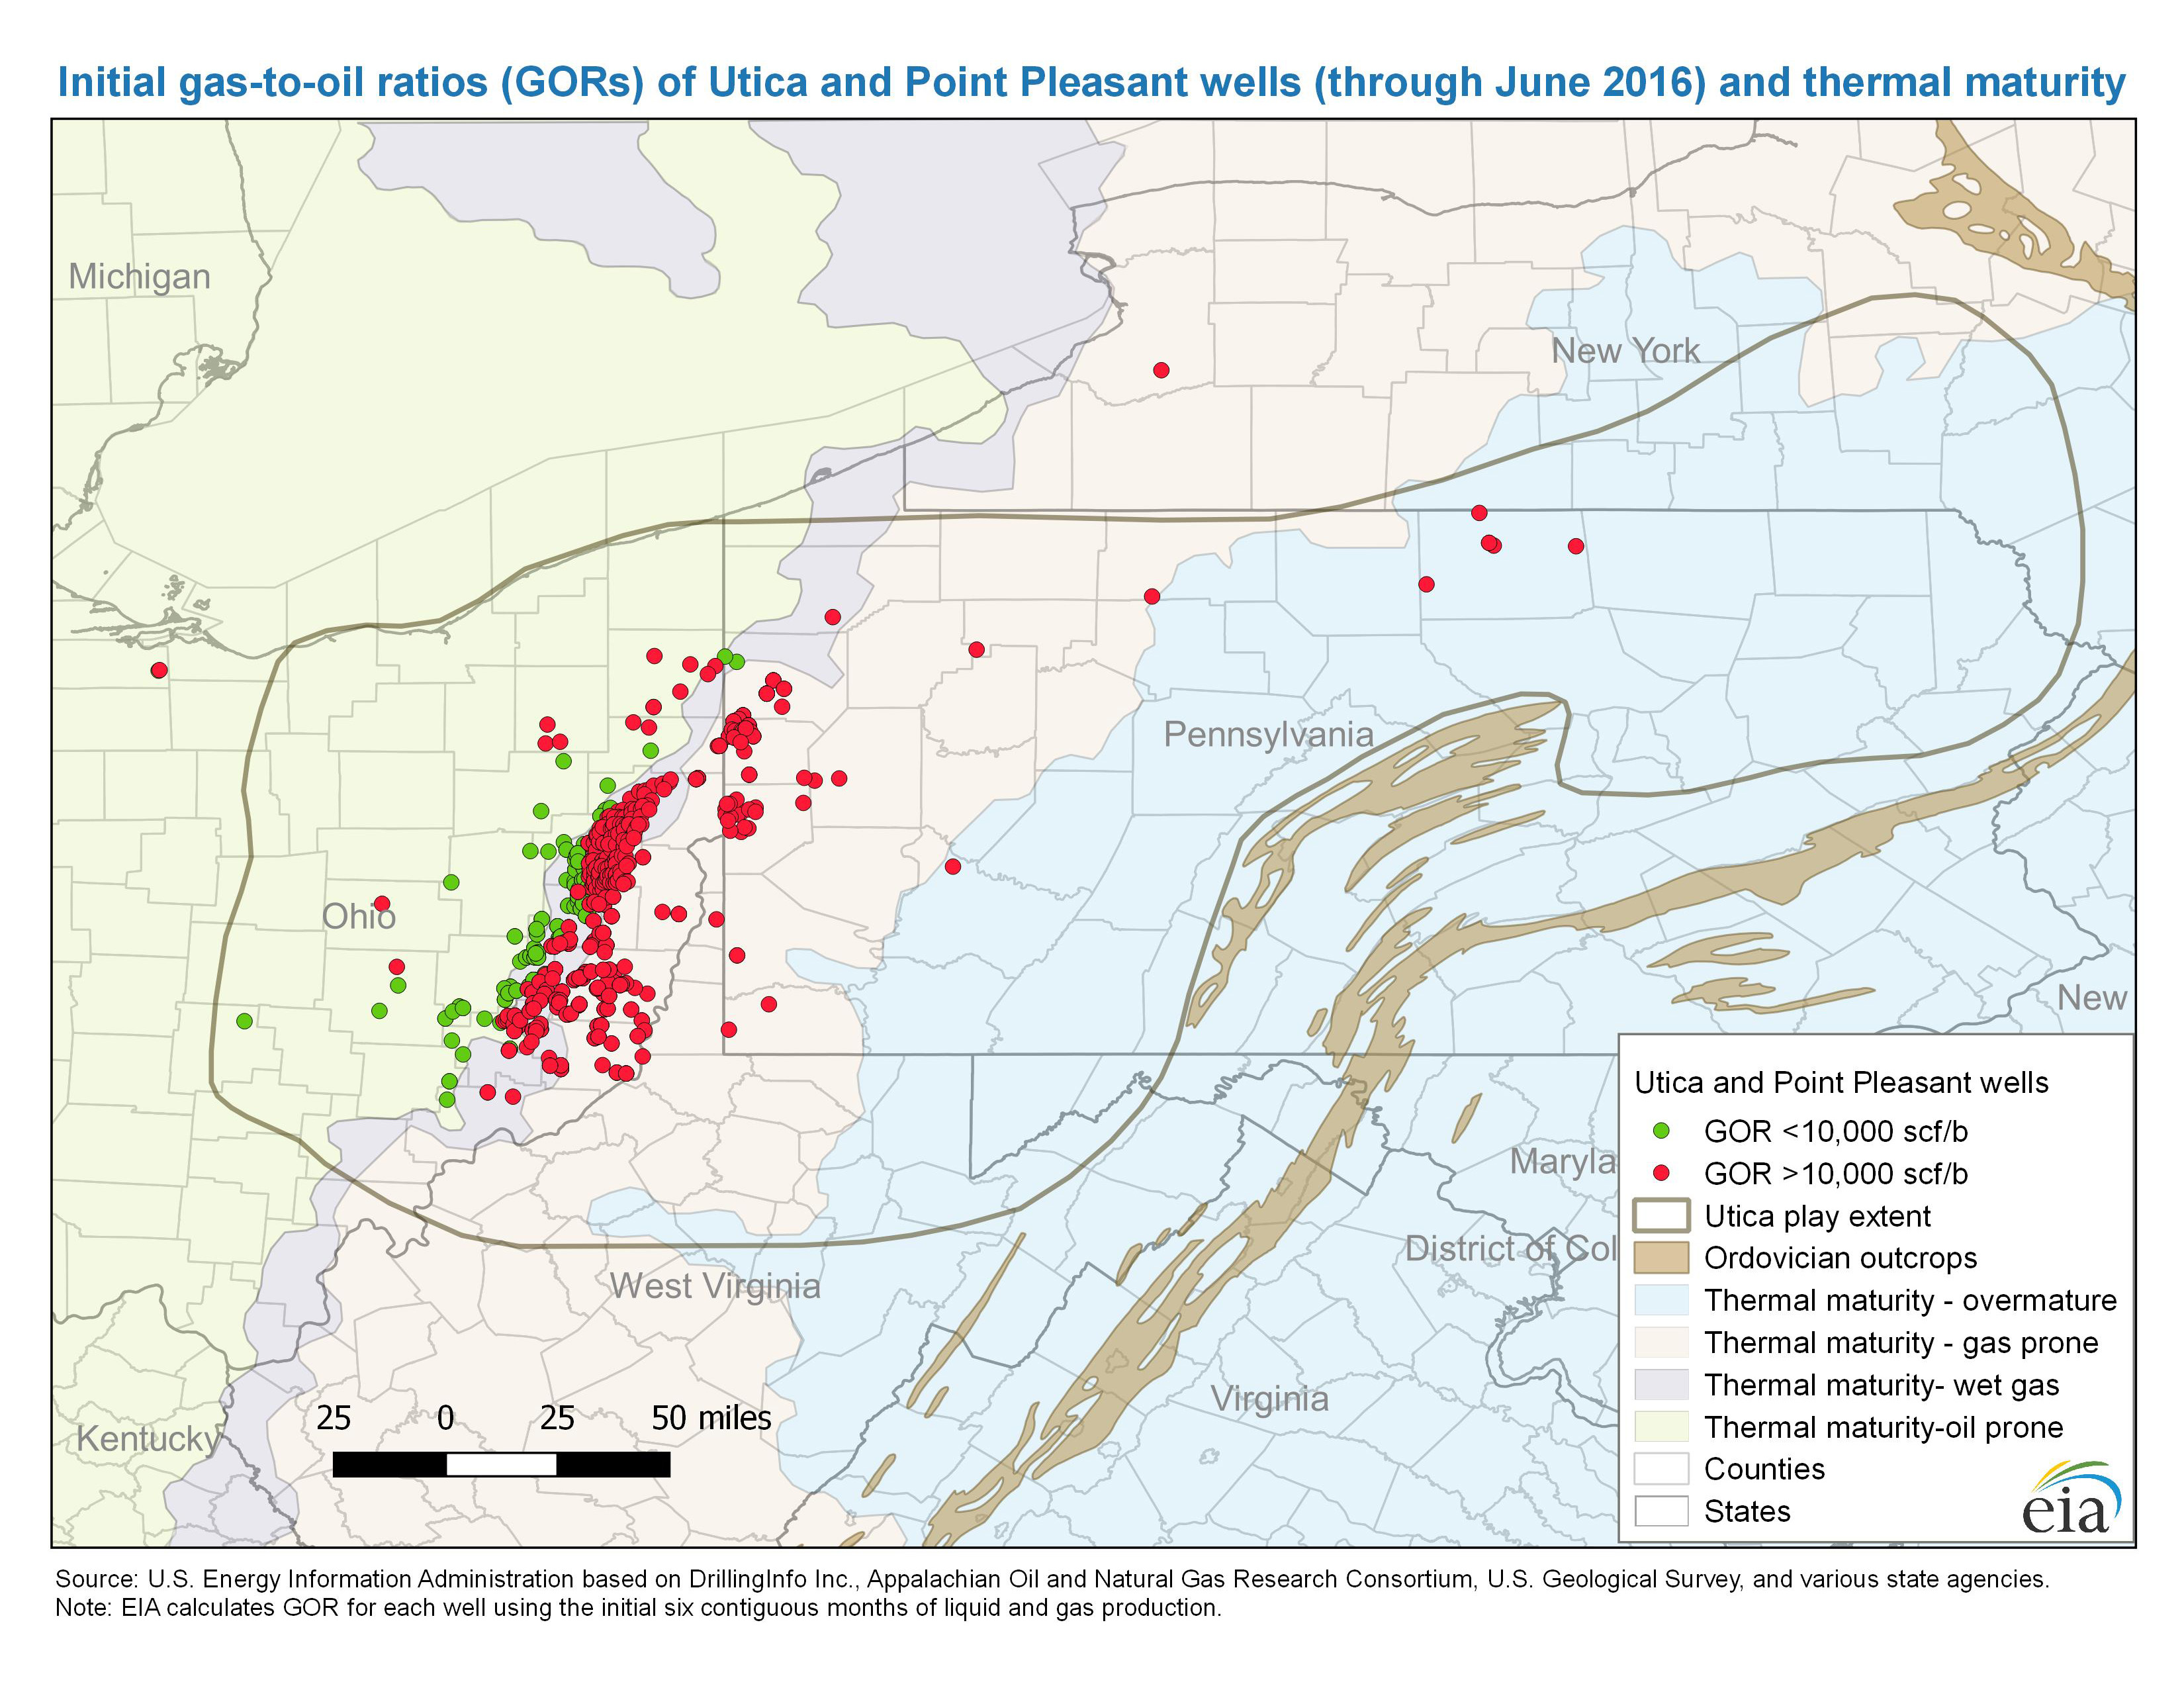 Interactive map of tight oil and shale gas plays in the contiguous